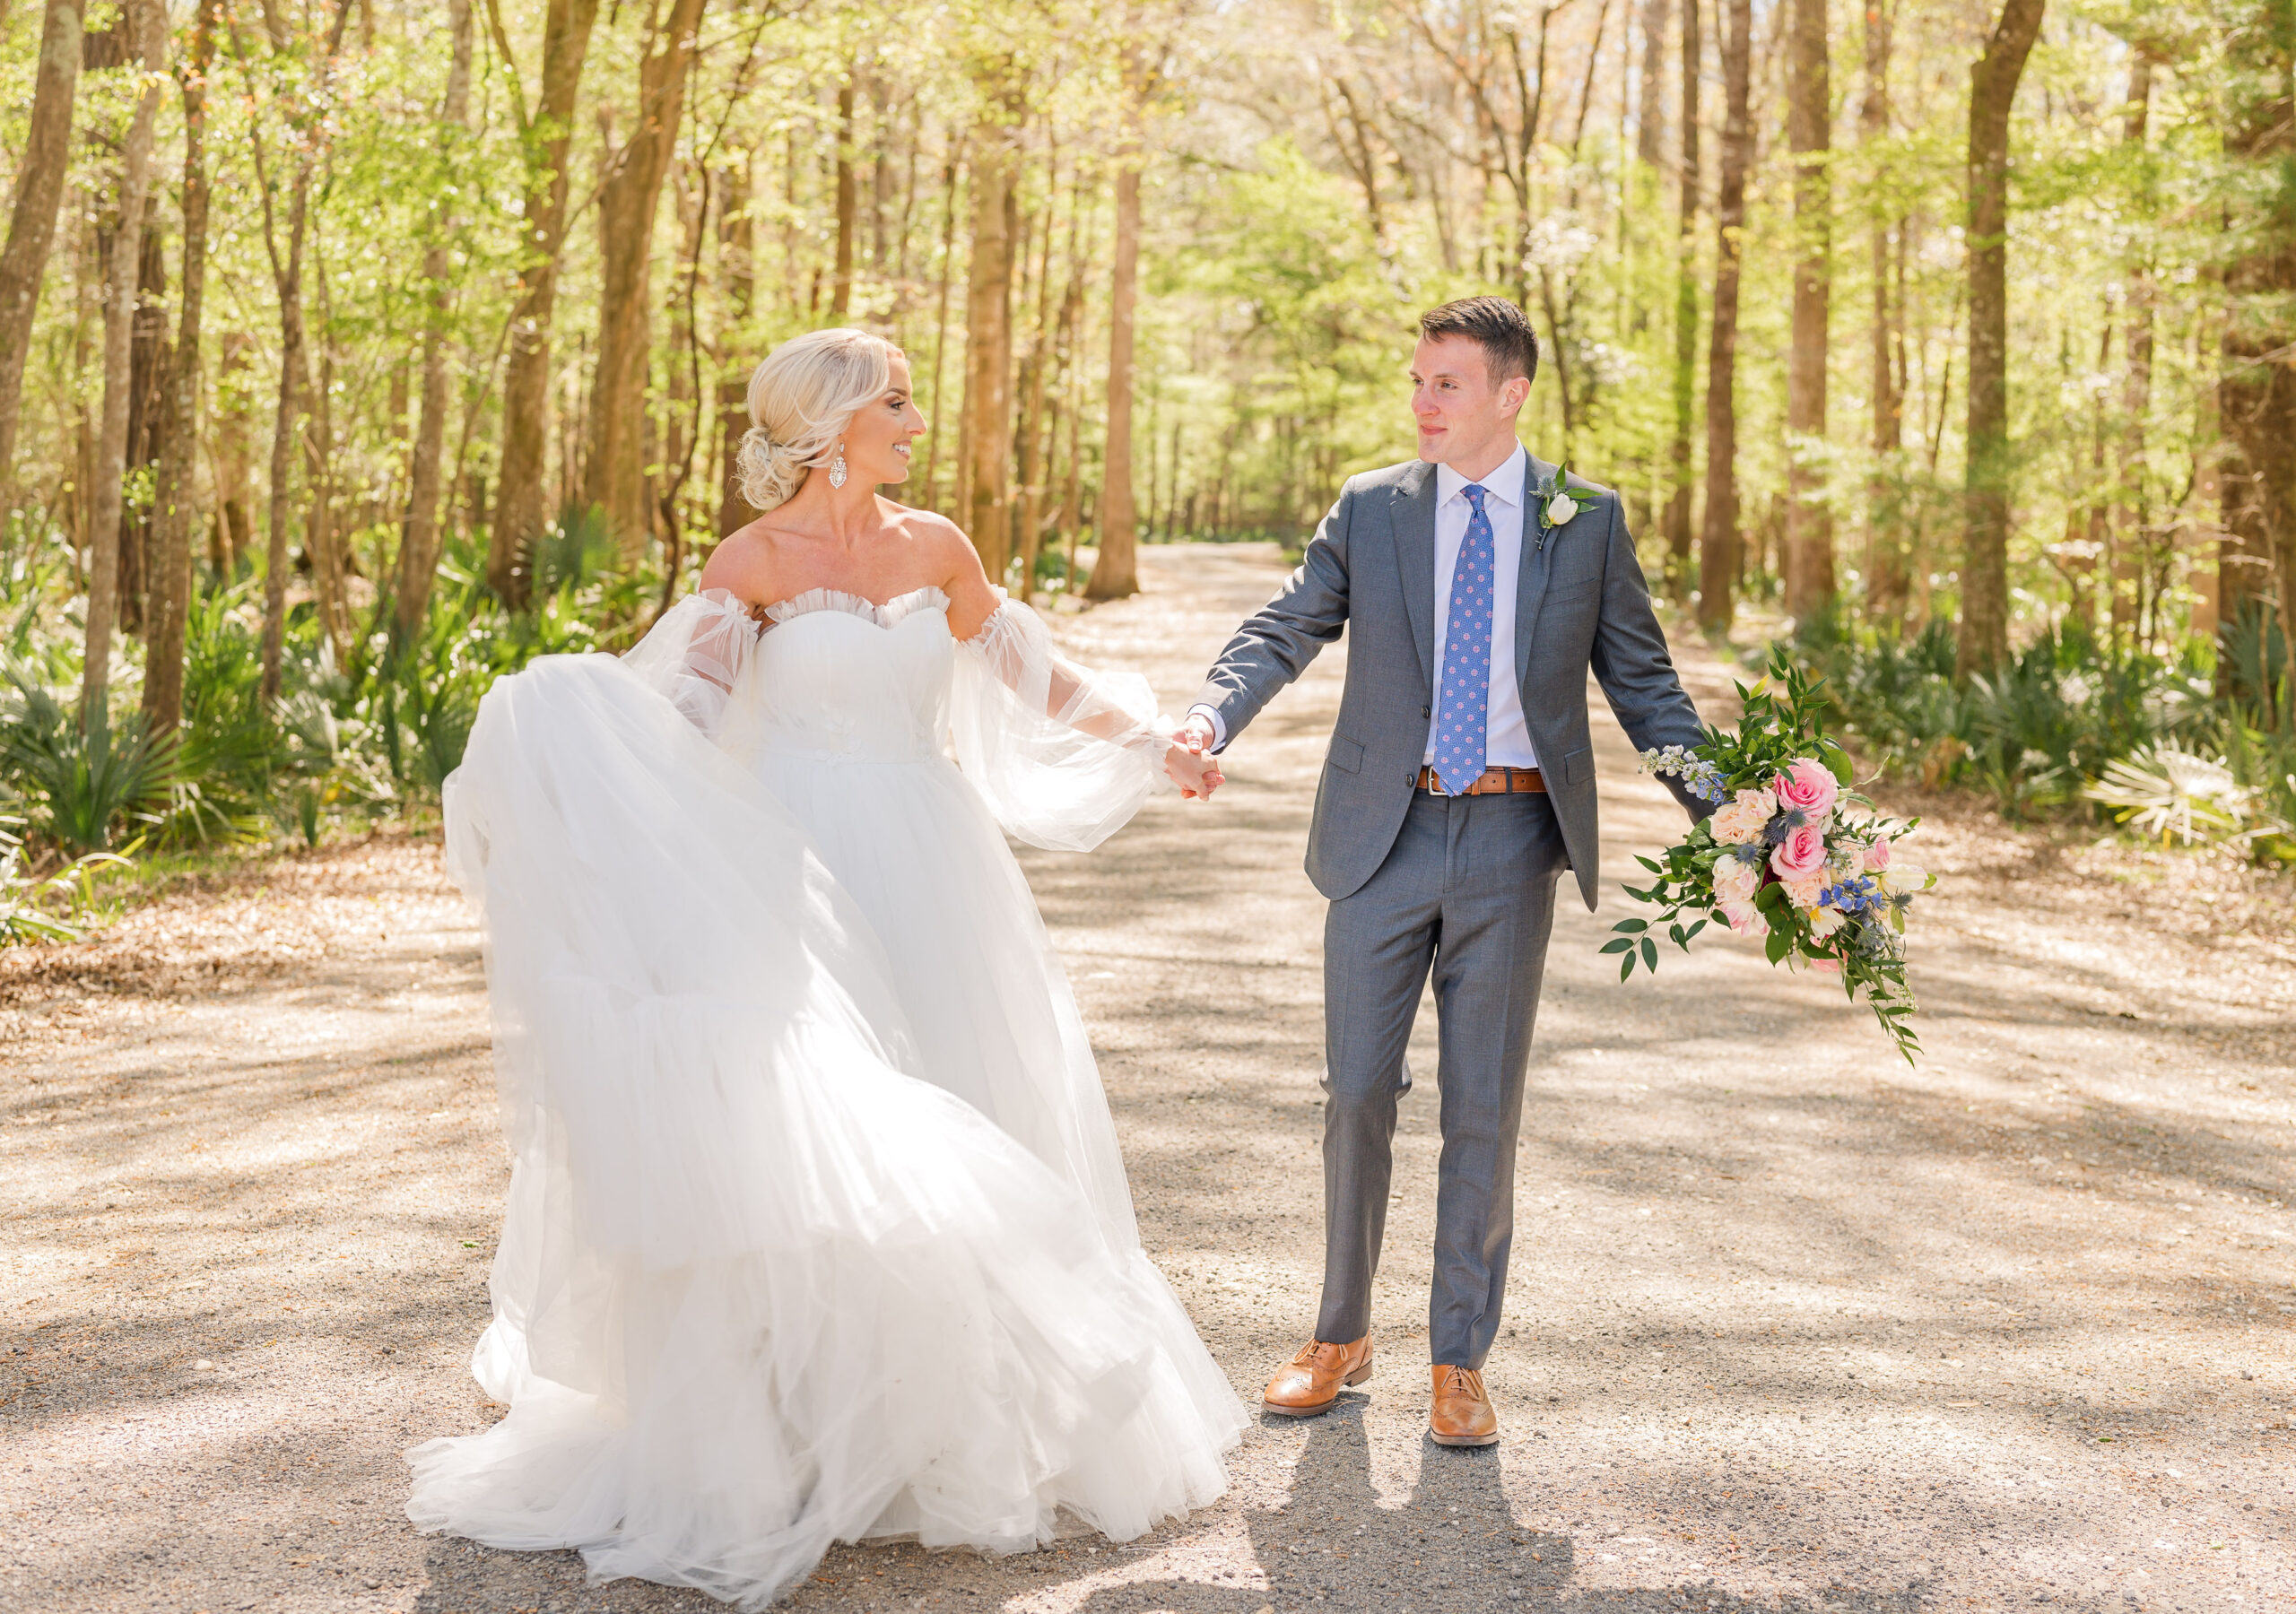 South Carolina outdoor wedding venue surrounded by Spanish moss trees